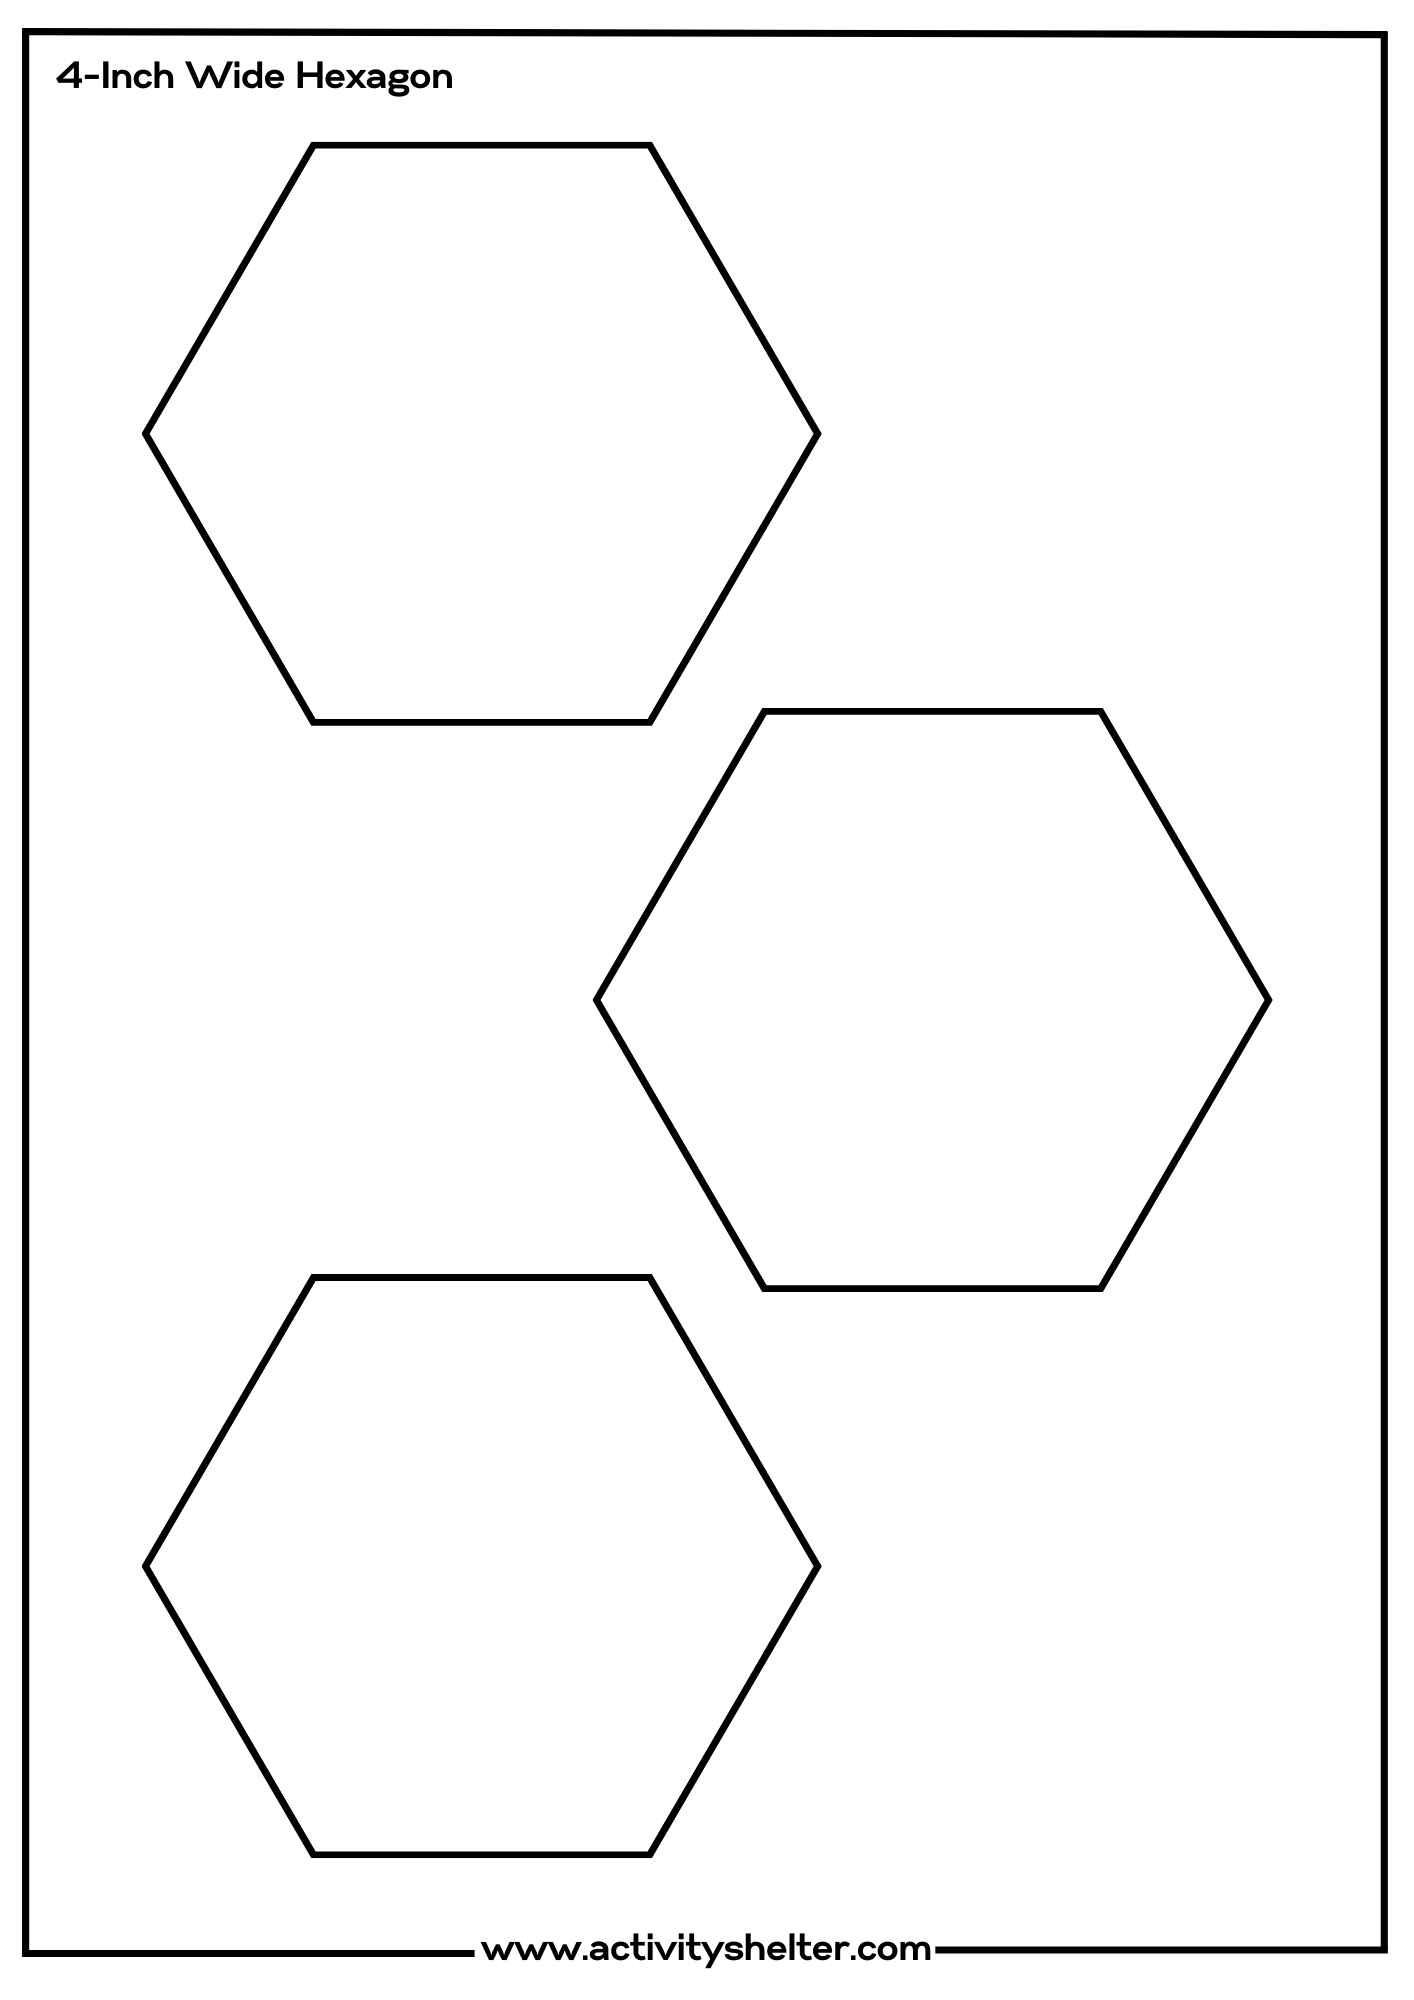 Template Hexagon Printable 4-Inch Wide